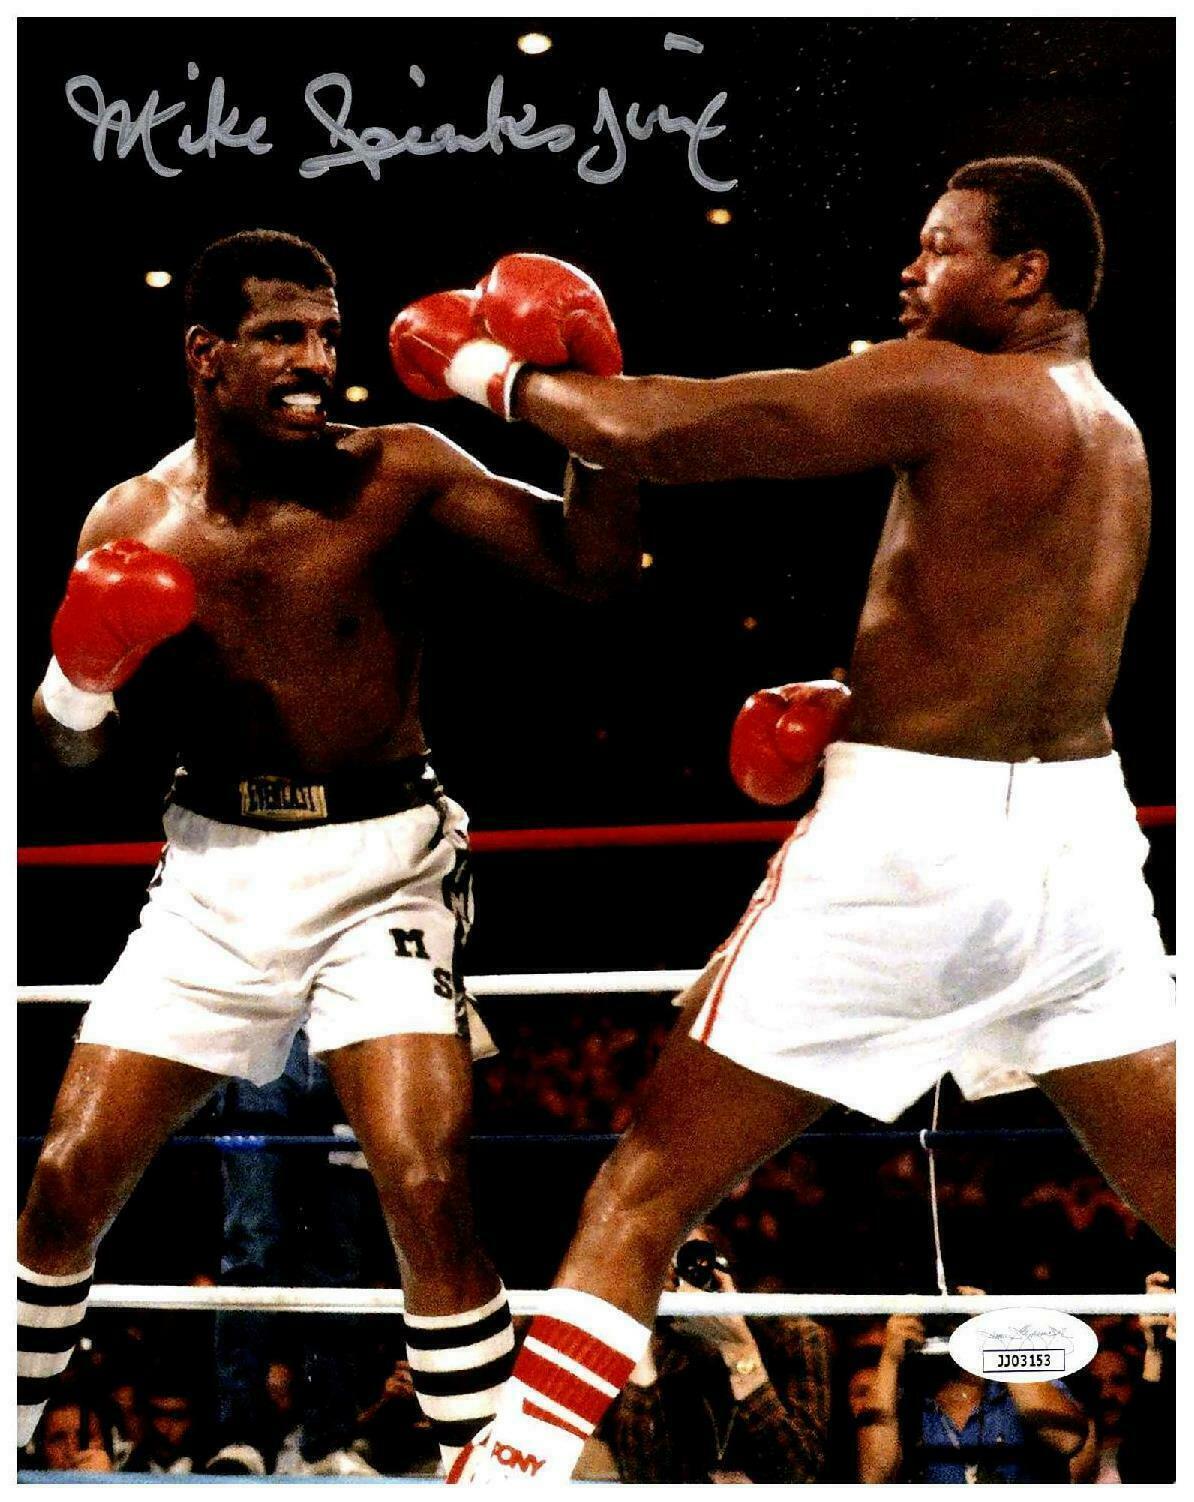 Michael Spinks Signed 8x10 Photo Poster painting - Boxing Fighter USA w/Holmes - JSA COA